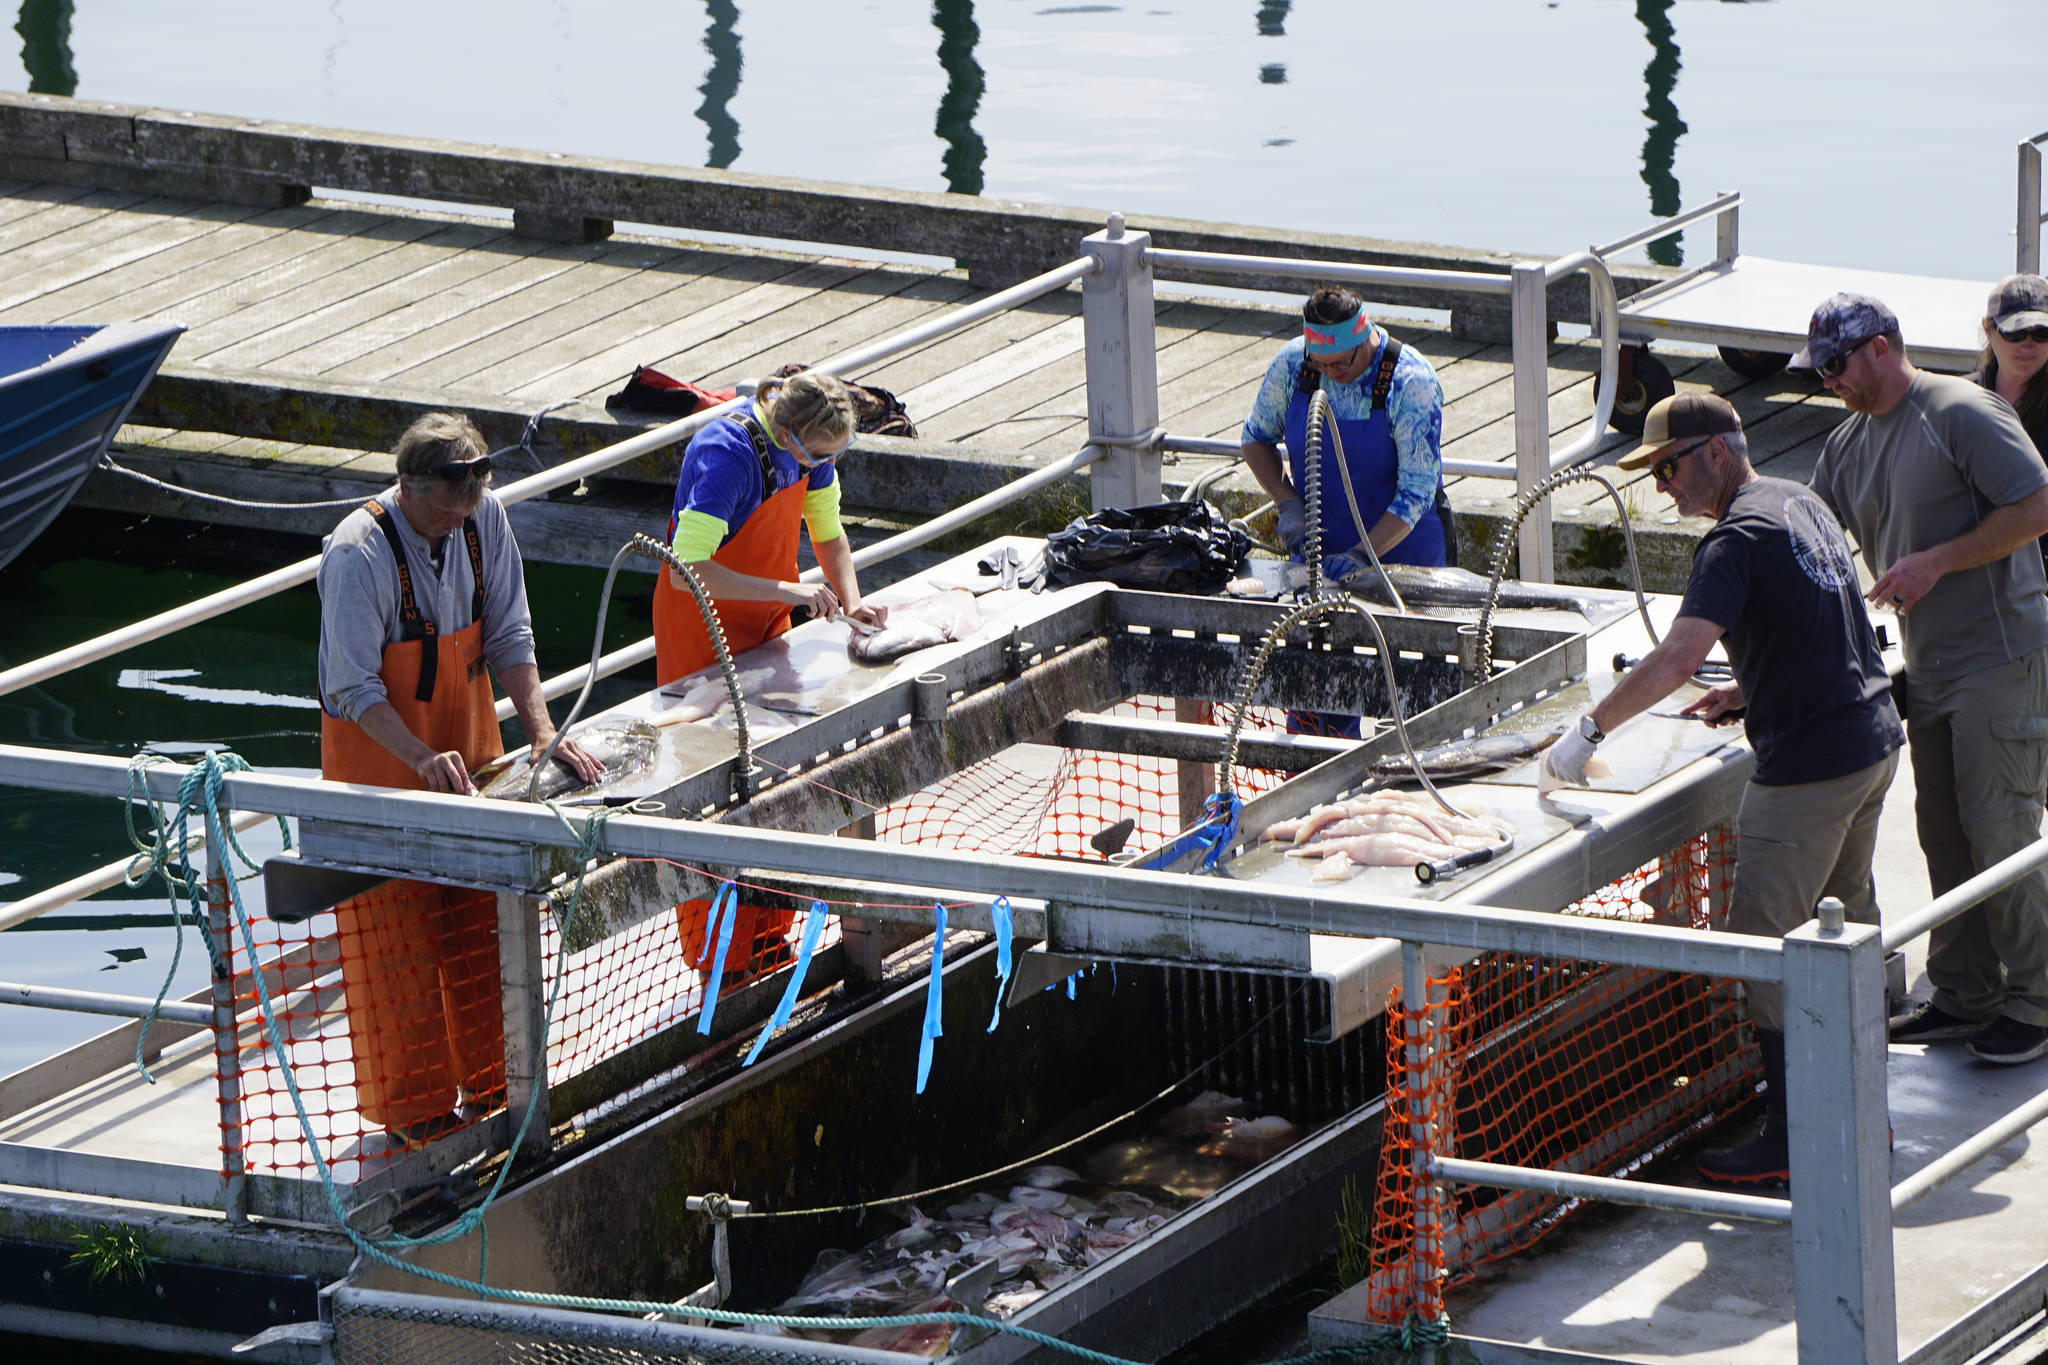 Anglers clean the day’s catch on Sunday, July 18, 2021, at the fish cleaning tables in the Seldovia harbor in Seldovia, Alaska. (Photo by Michael Armstrong/Homer News)